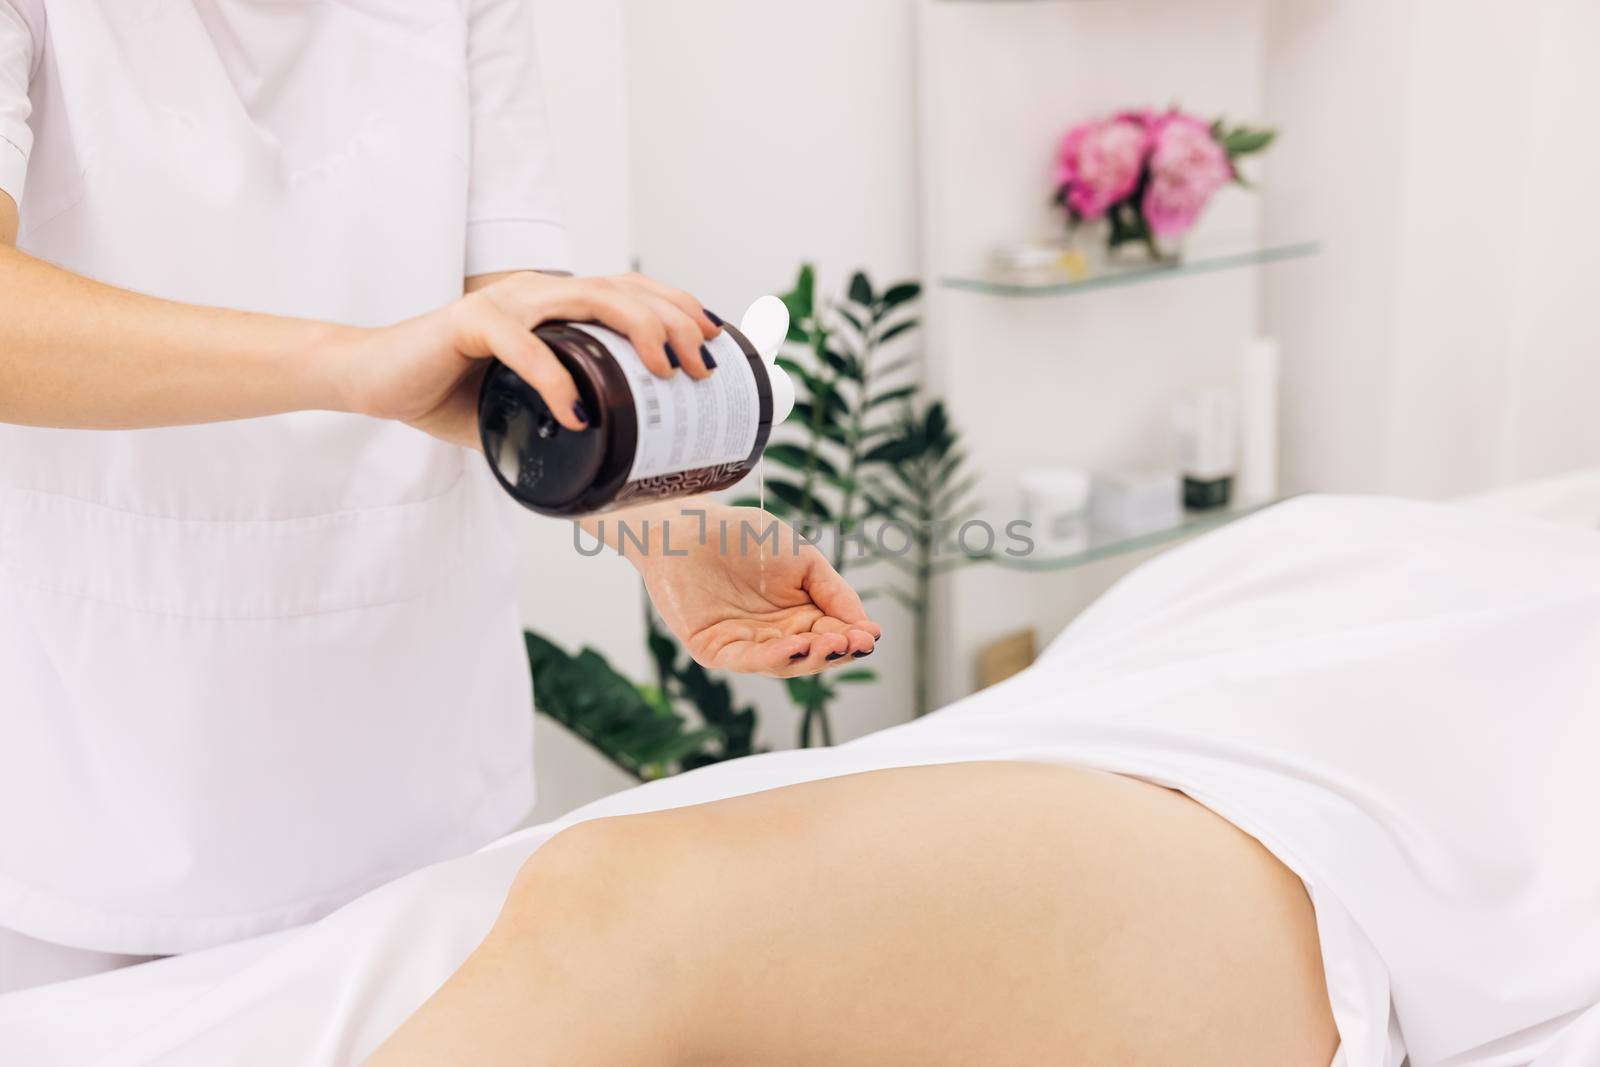 Therapeutic massage of the female leg. Woman hands doing professional massage. Creme treatment on woman legs with hydrating lotion. Preventing dry skin on female body parts close-up by uflypro